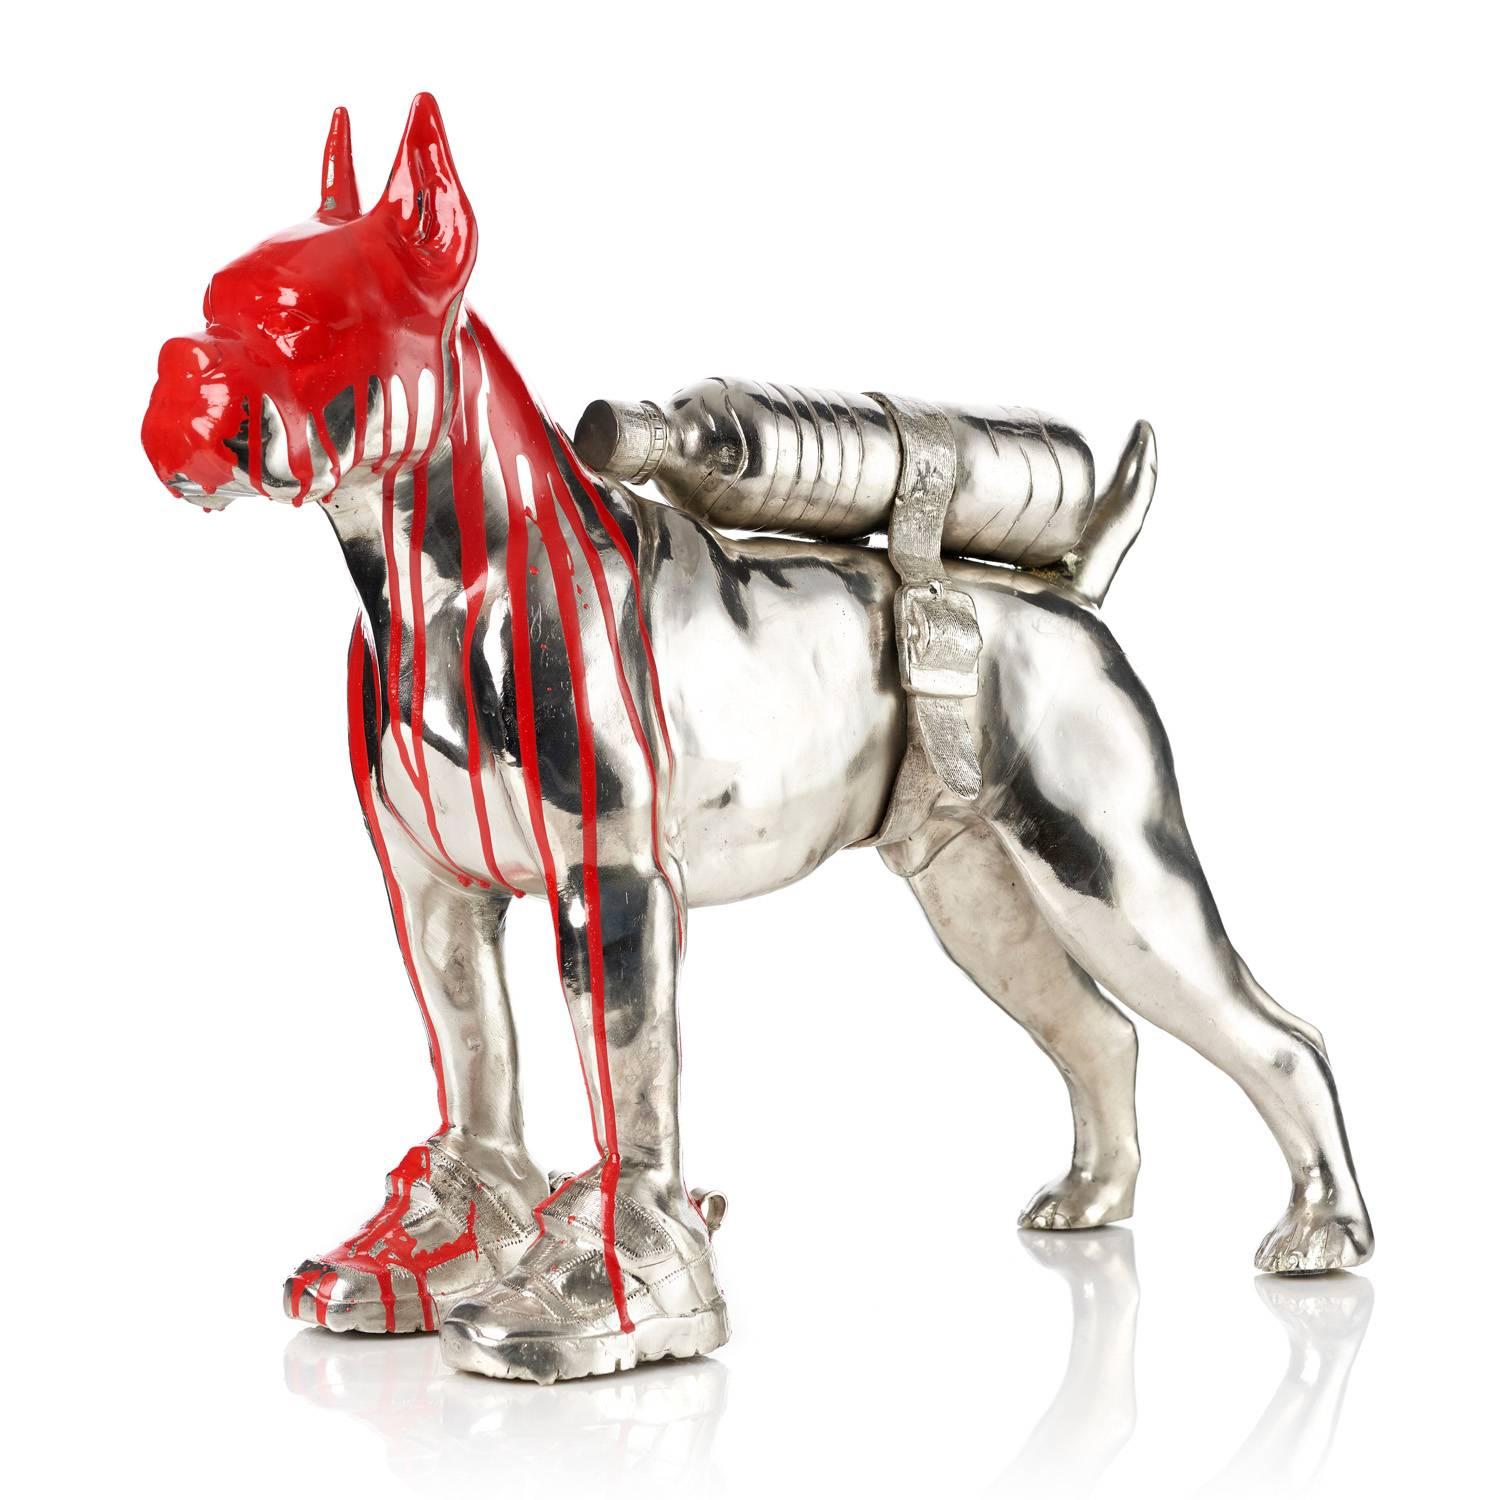 William Sweetlove Figurative Sculpture - Cloned Bulldog with pet bottle (red)